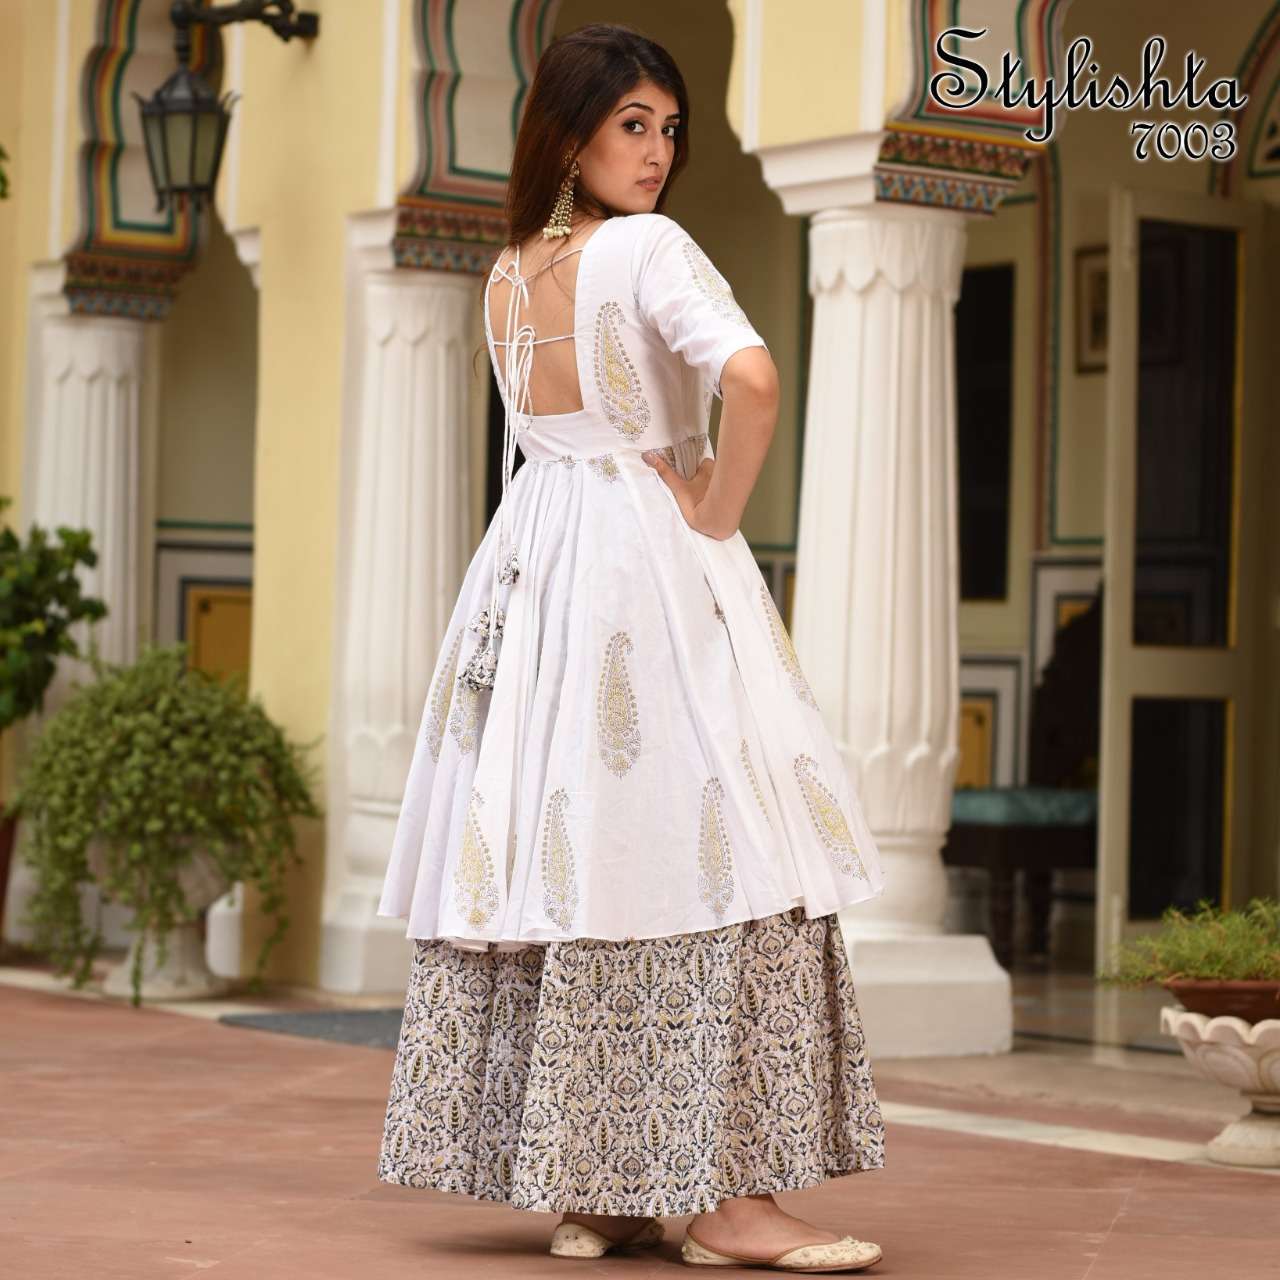 STYLISTHA PRESENTS STYLISTHA VOL-7 DNO 7001 - 7008 SERIES INDIAN WOMEN READY TO WEAR PURE MUSLIN ANARKALI PRINTED KURTI  CASUAL TRADITIONAL ETHNIC CASUAL WEAR KURTI COLLECTION 3986